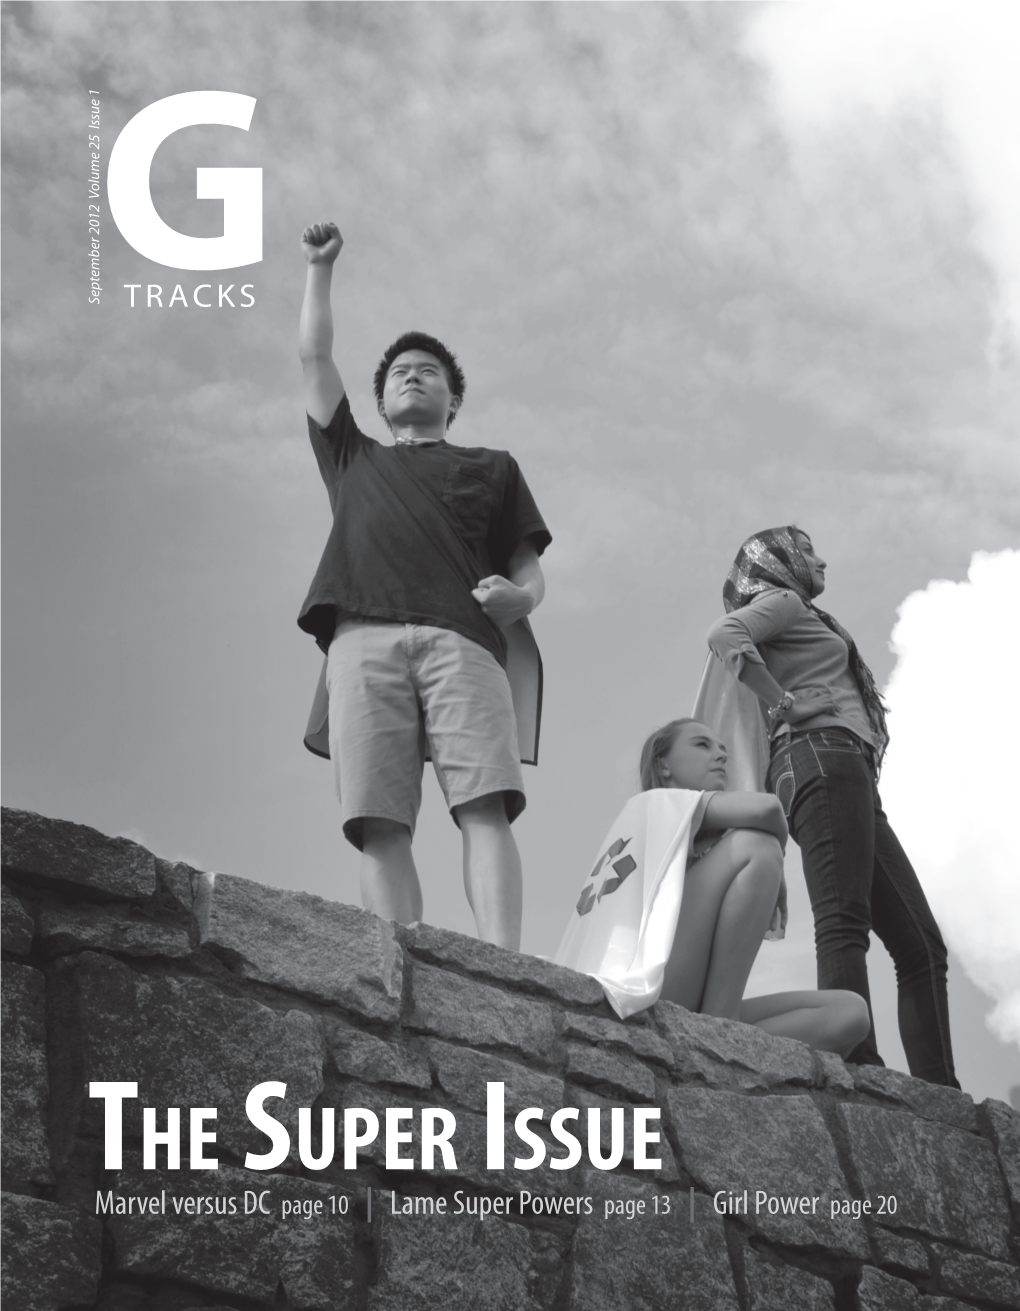 The Super Issue